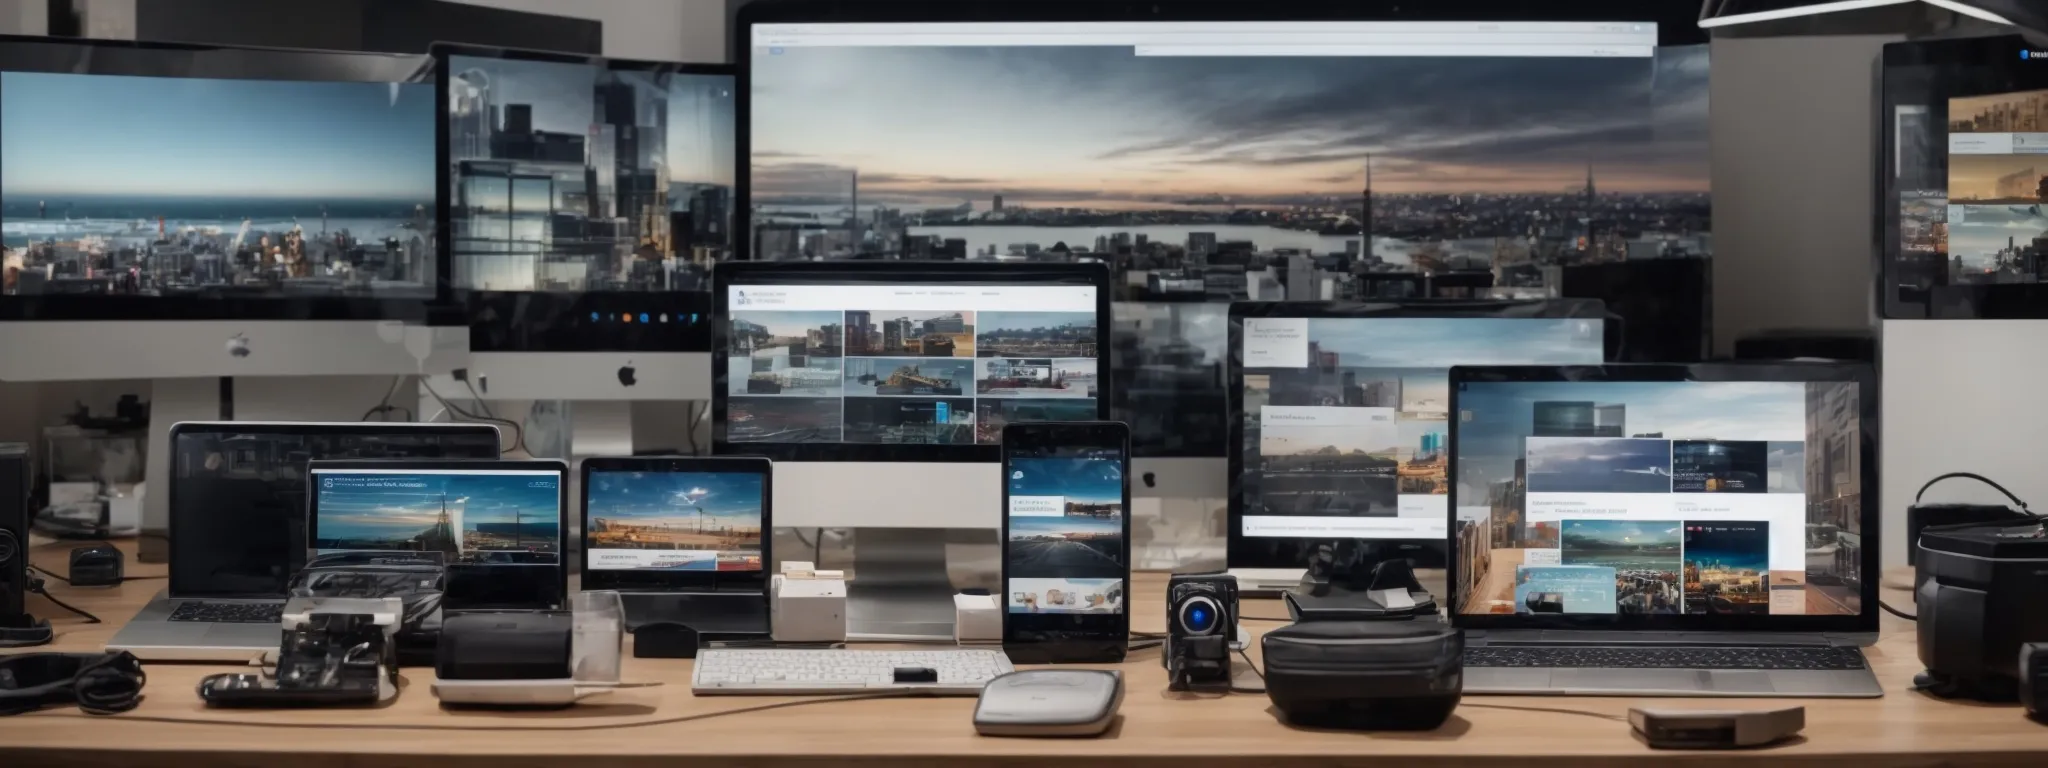 a panoramic view of diverse digital devices representing different platforms, all displaying cleanly organized web pages with seamless navigation.